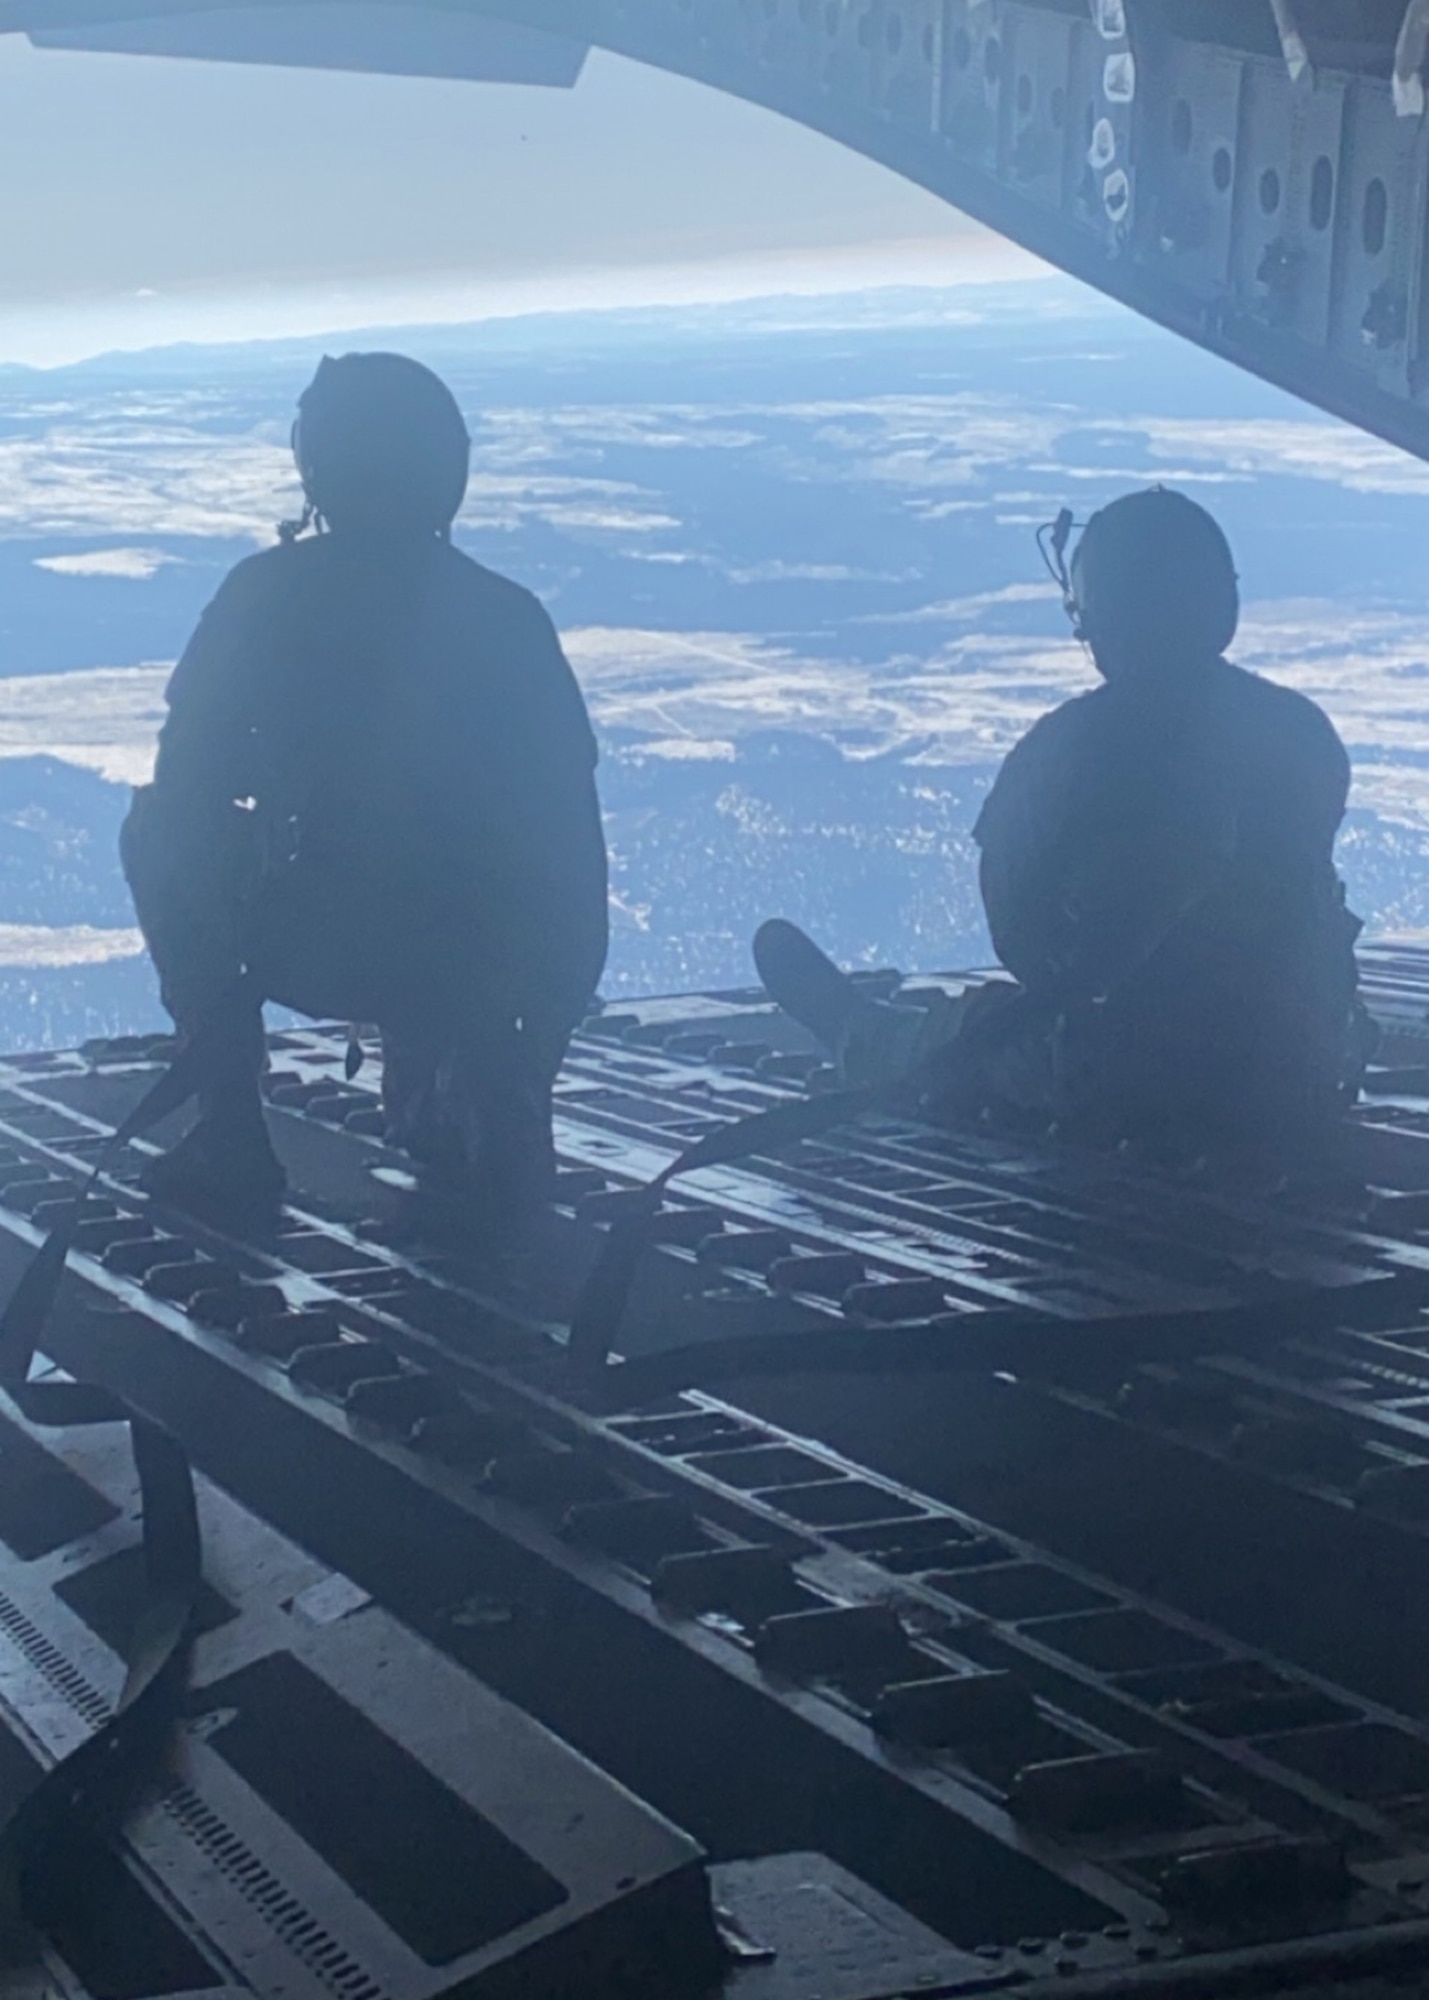 U.S. Air Force Airmen 1st Class Michael Geller, left, and Trevor Marlin, both loadmasters with the 517th Airlift Squadron, look out the open cargo door of a U.S. Air Force C-17A Globemaster III aircraft assigned to the 176th Wing, Alaska Air National Guard, over northwestern Colorado, Jan. 9, 2021. Thirteen Airmen with the 517th AS from Joint Base Elmendorf-Richardson, Alaska, trained for a week in the southwestern U.S. with the C-17, focusing on Agile Combat Employment to train and prepare for global operations in a deployed environment.